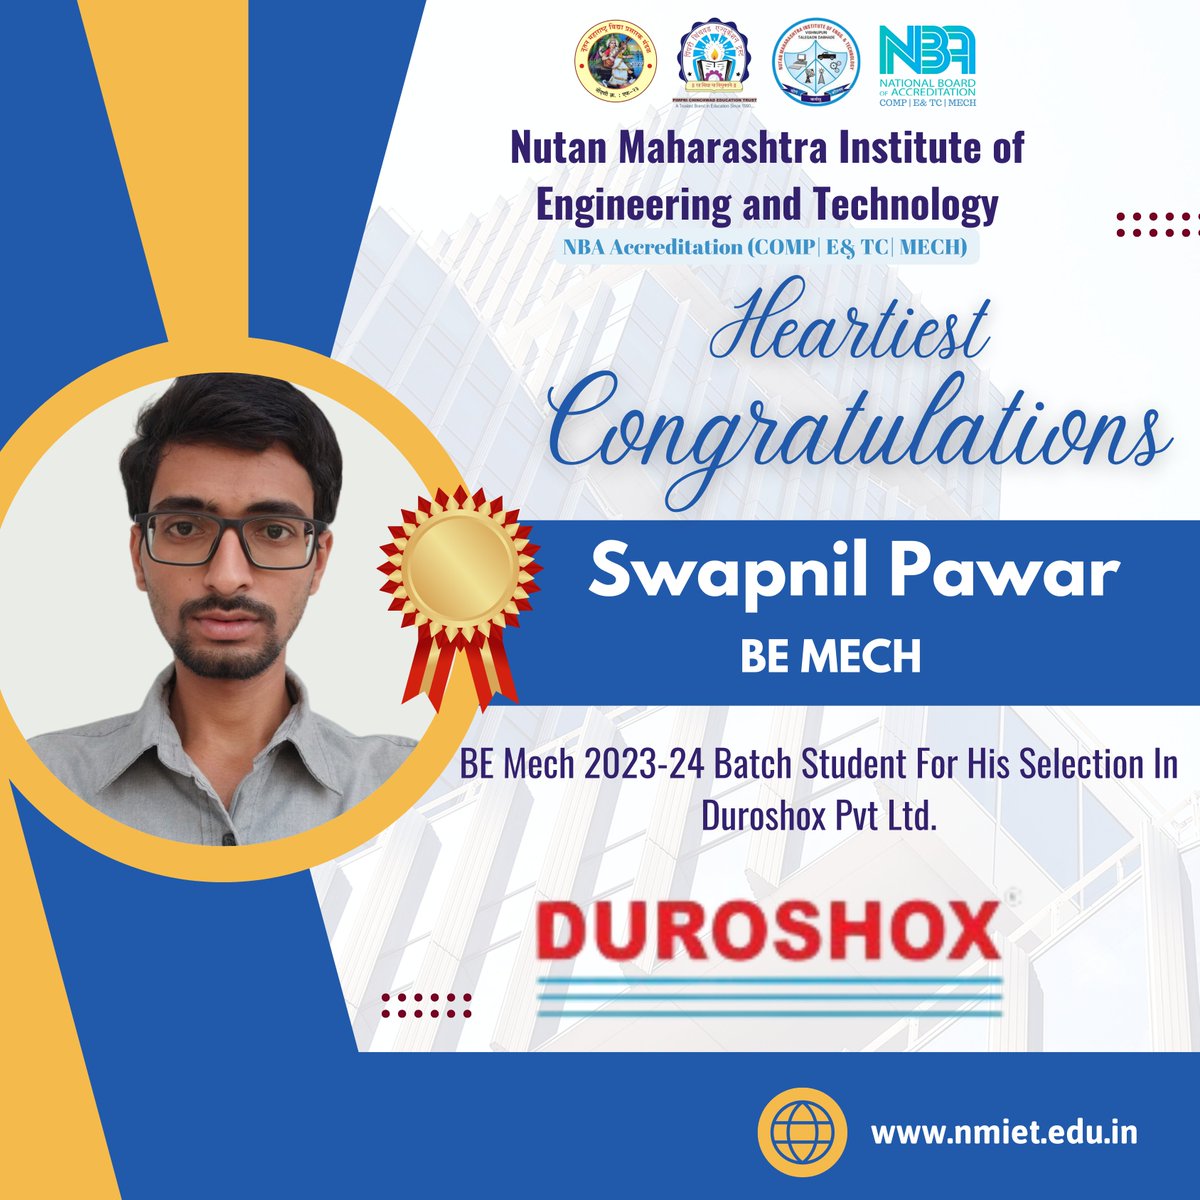 We are happy to share that our B.E. Mech student, Mr. Swapnil Pawar, has been selected in Duroshox.

#PCET #NMIET #Duroshox #Placements2024 #BestPlacementCollegeinPune #StudentAchievement #NMIETPlacements #Placement #PCETPlacement #Pune #engineeringcollegeinpune #engineering